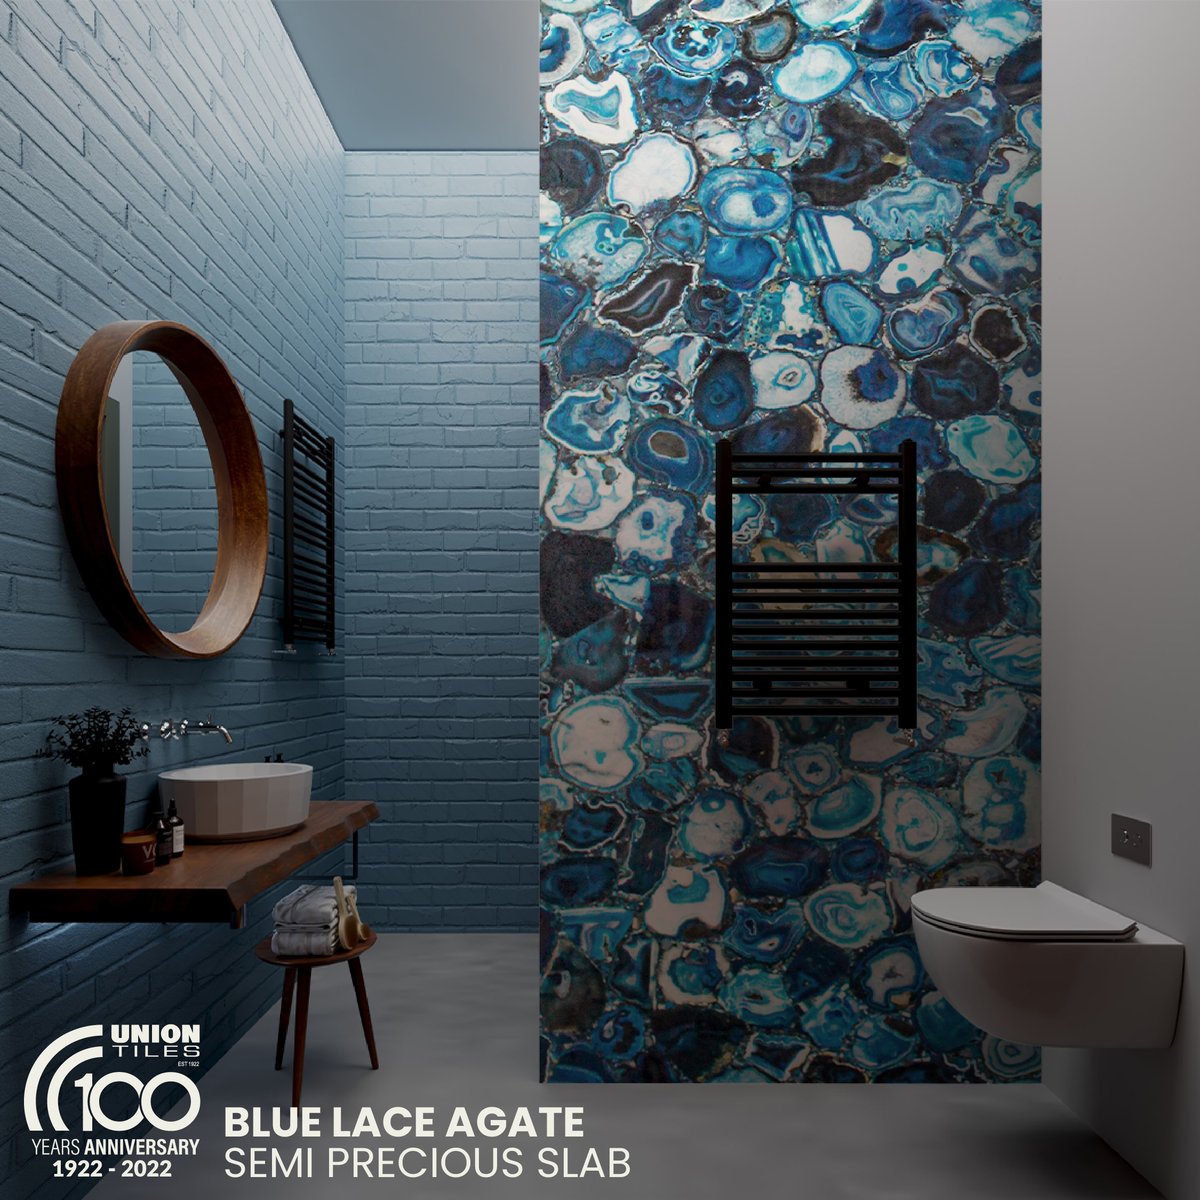 Create a captivating feature in your home with Blue Lace Agate Semi Precious Slabs from Union Tiles. 
Visit us in-store to discover our range of natural stone slabs & accessories 👉 ow.ly/y9vL50Ml9vu

#designstudio #uniontiles #semipreciousslab #naturalstone #bluelaceagate